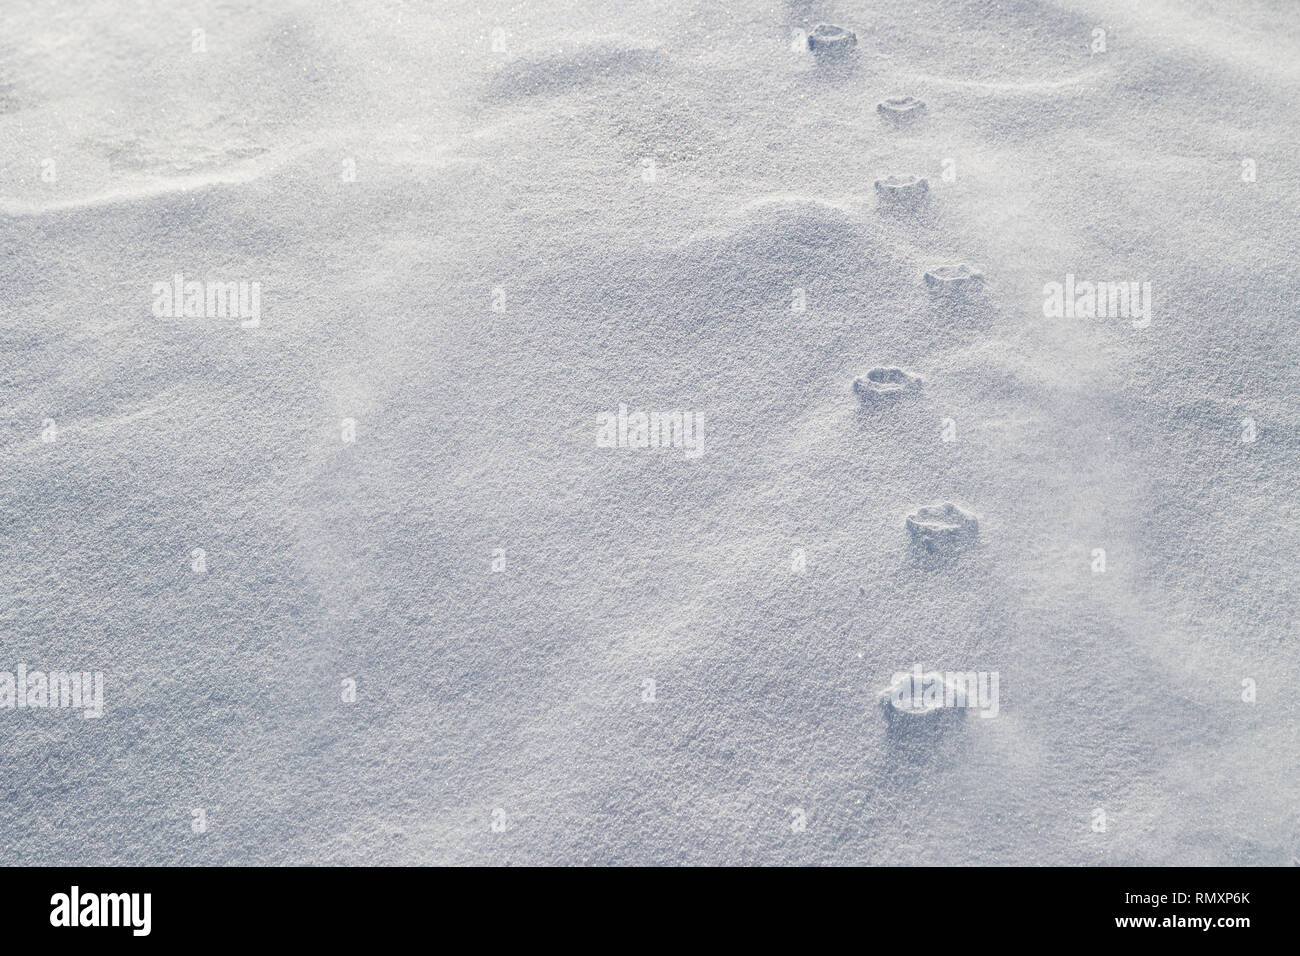 Haute relief of a lone dog`s paw prints in blowing snow. Strong winds have eroded the loose snow around the compressed paw prints. Stock Photo